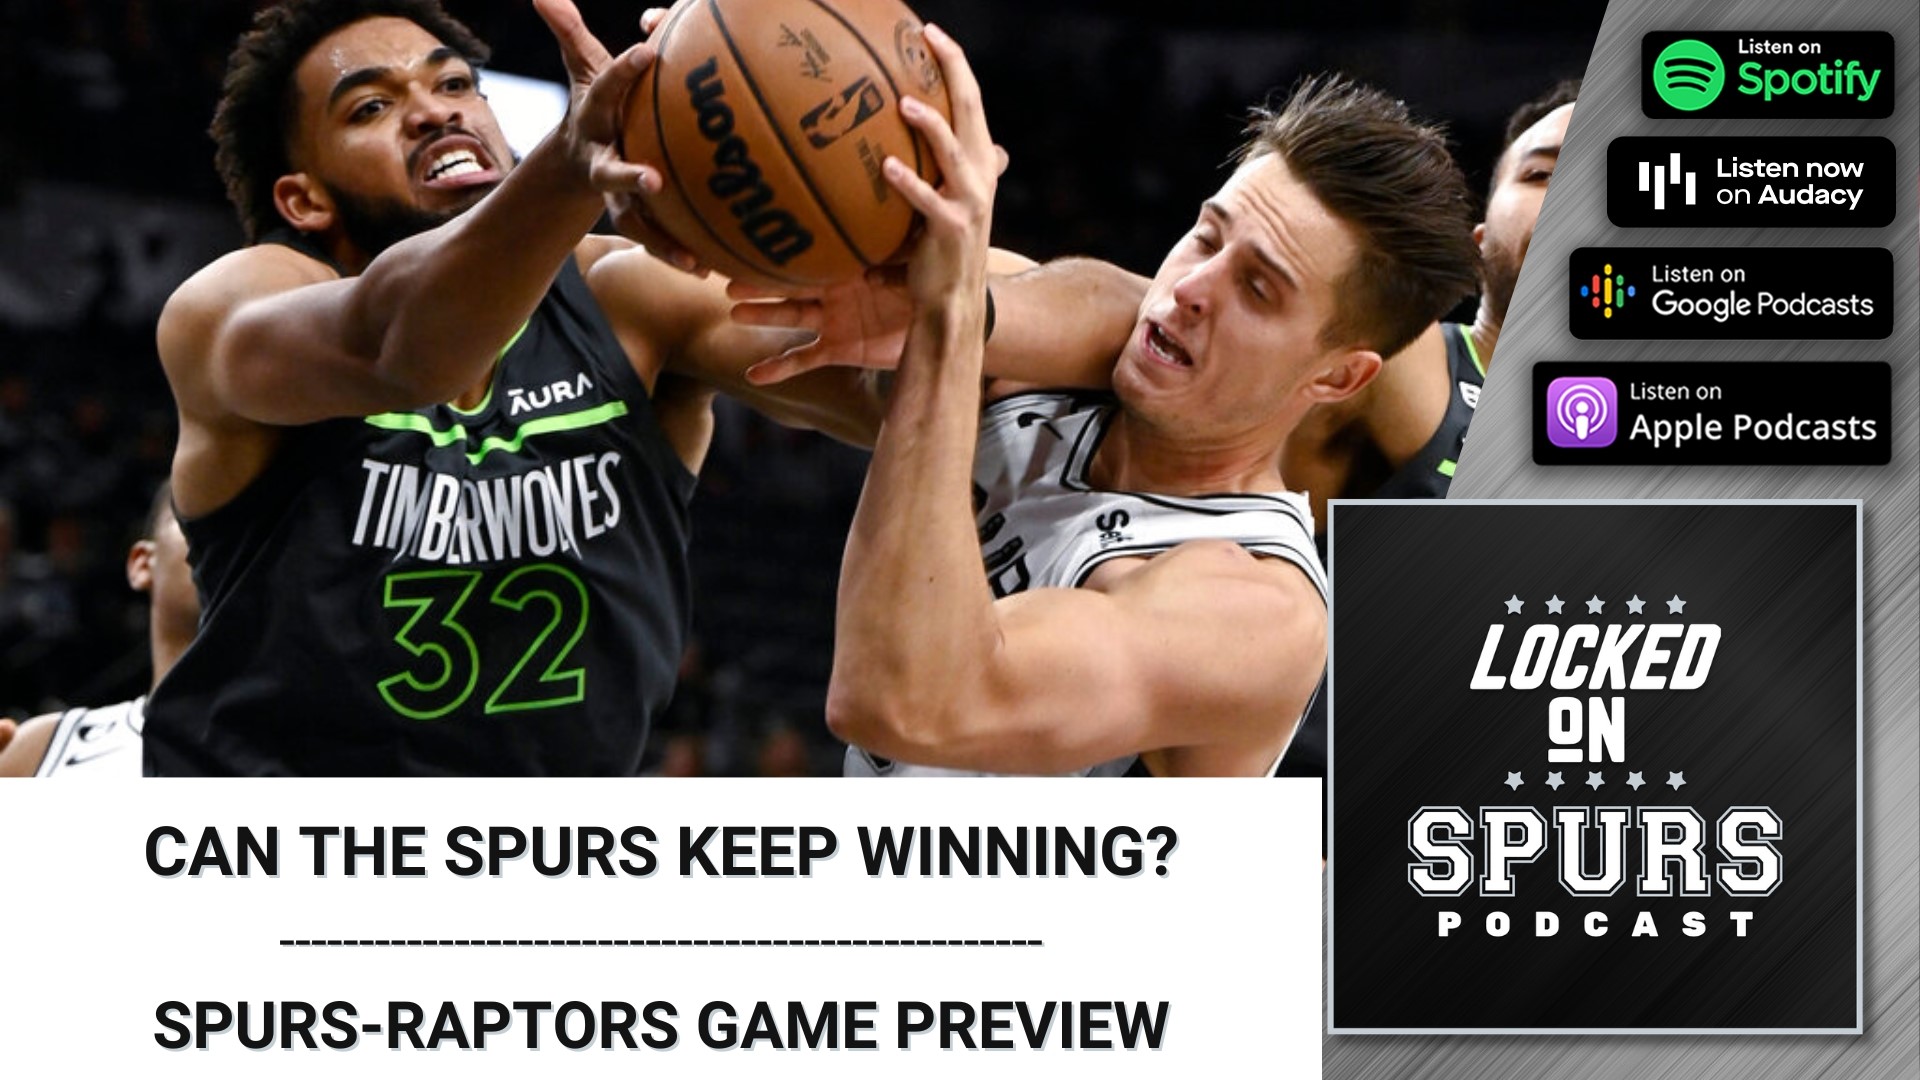 Can the Spurs keep their winning ways going?